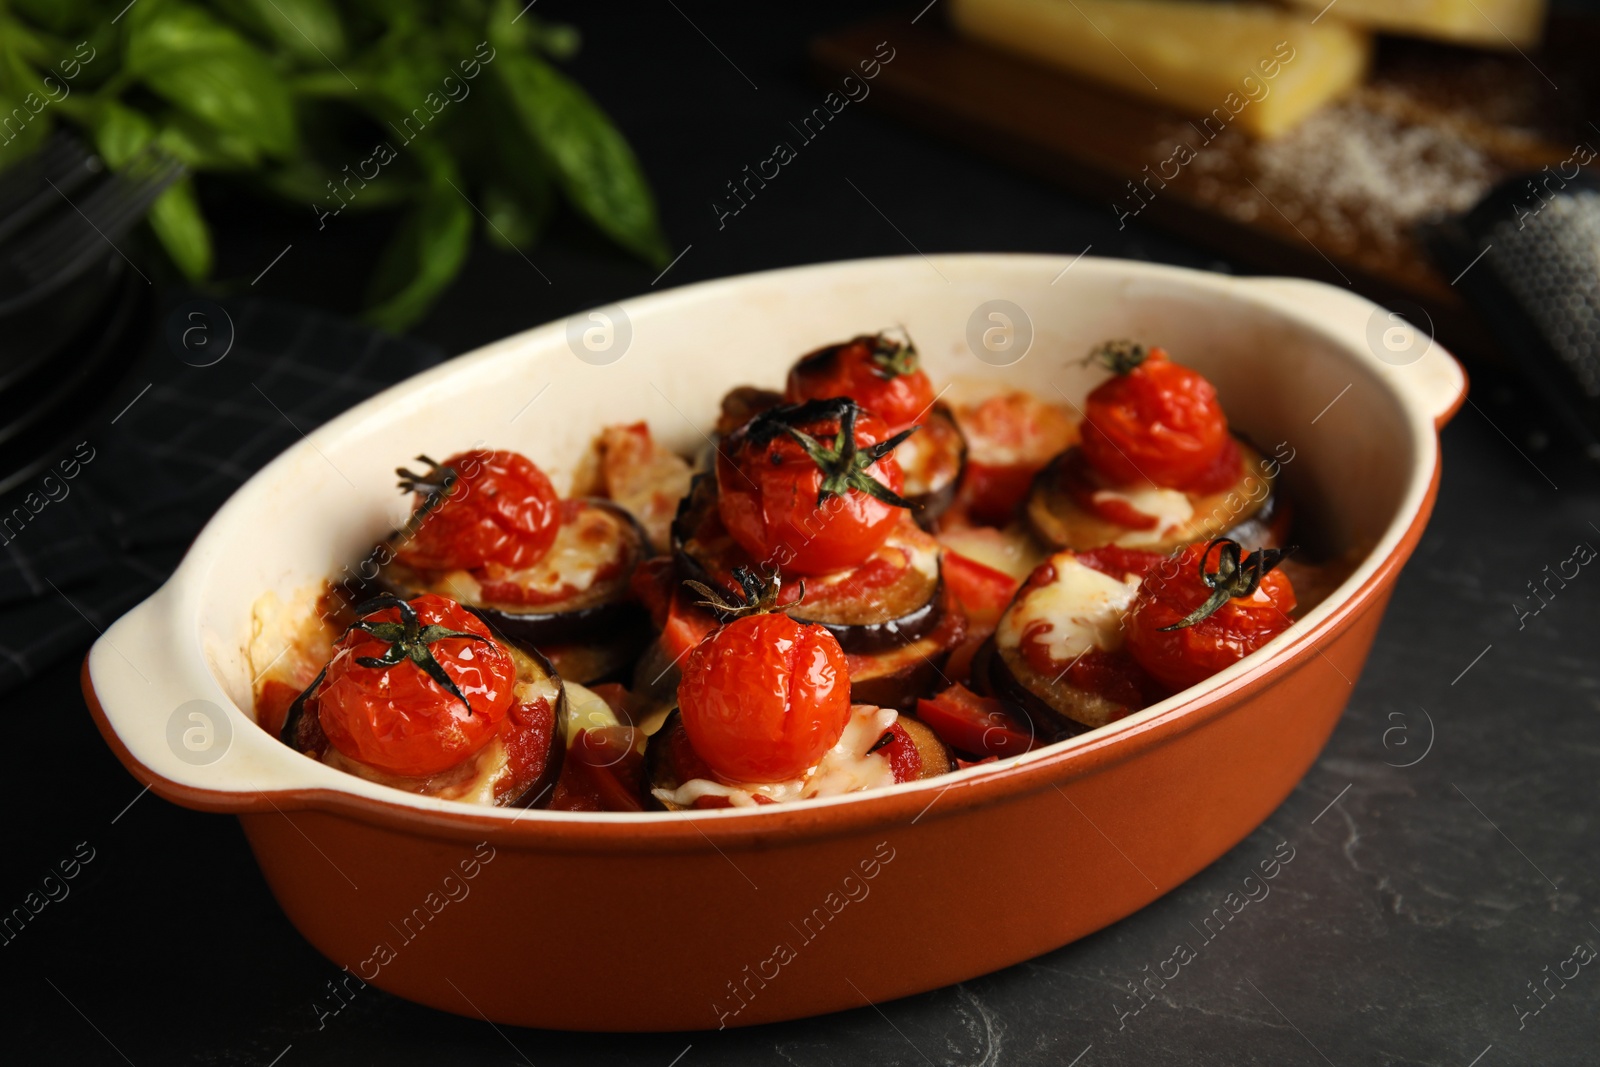 Photo of Baked eggplant with tomatoes and cheese in dishware on black table